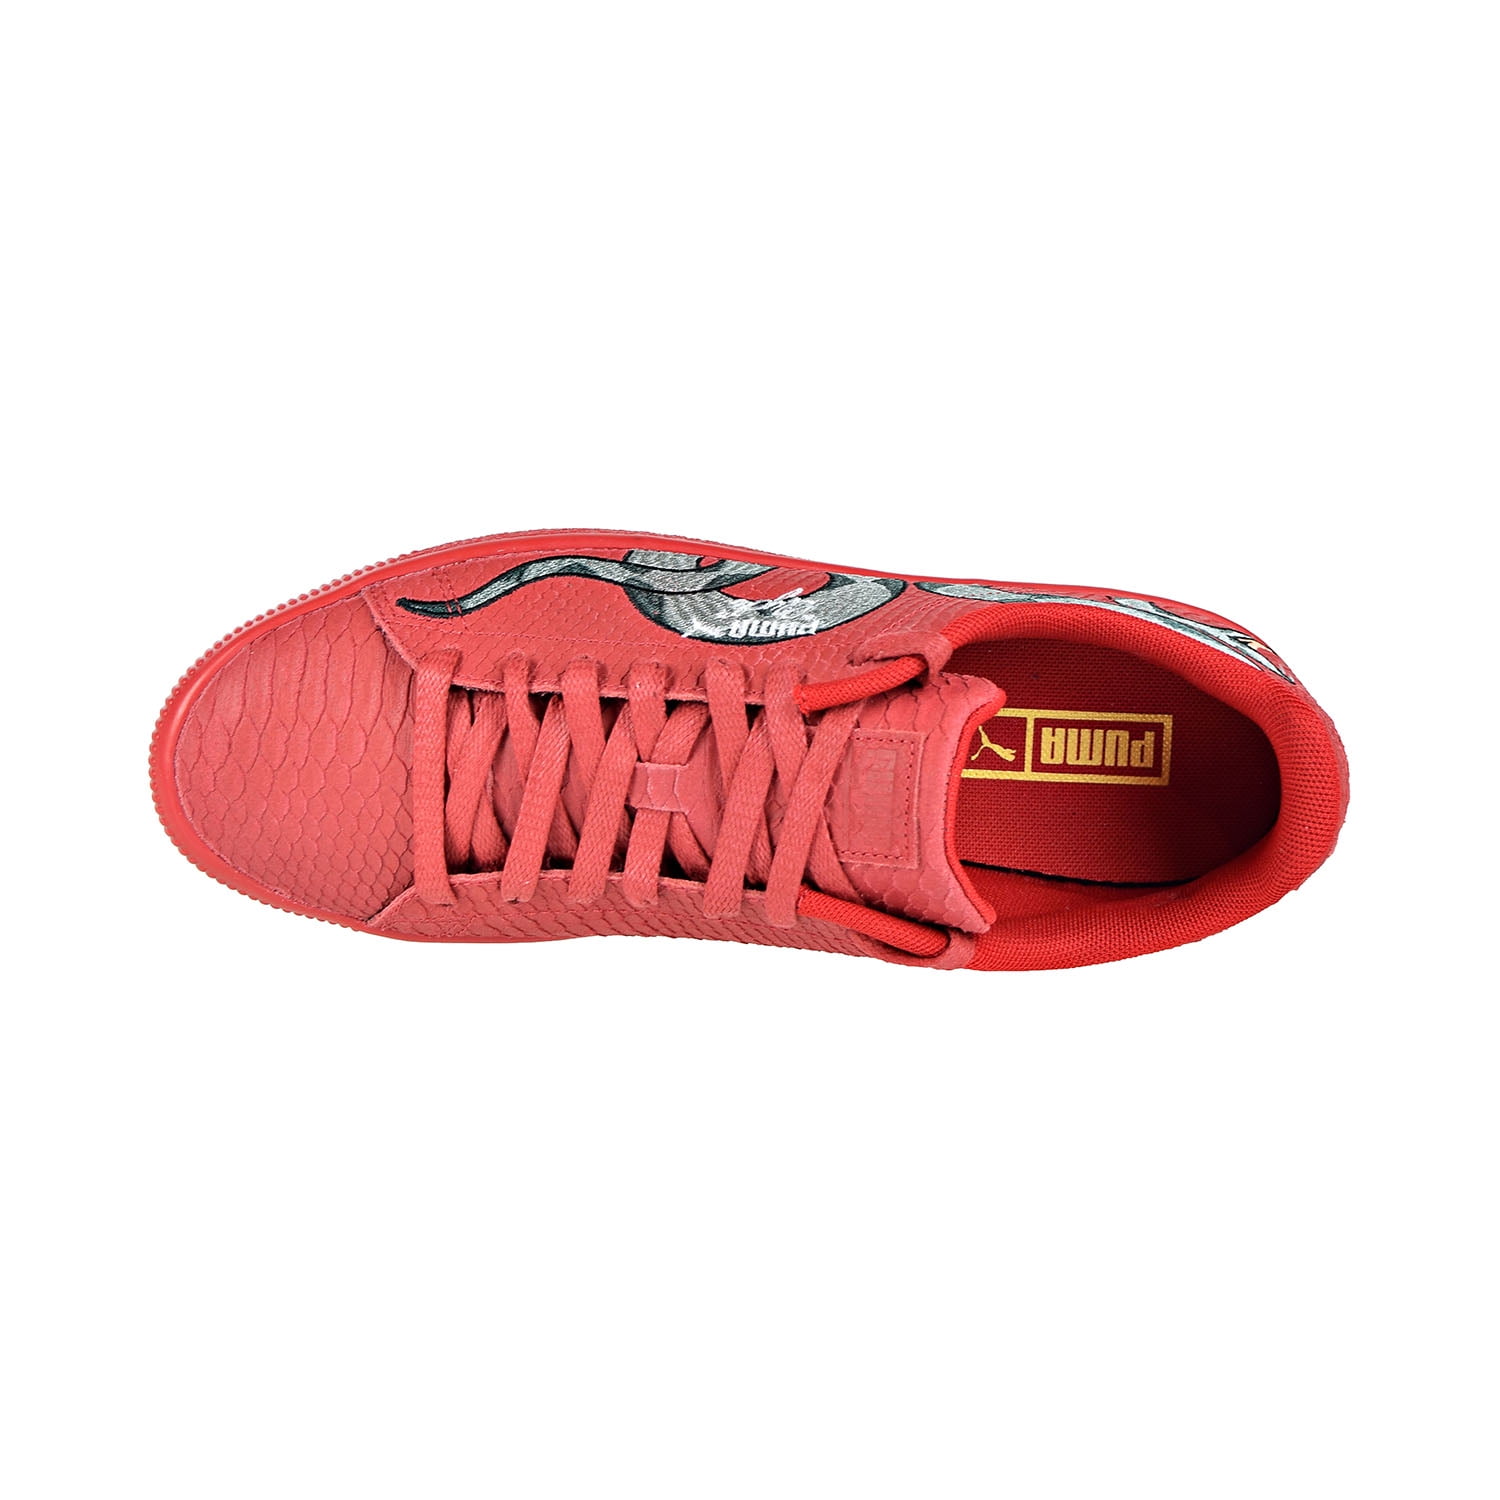 puma clyde red snake